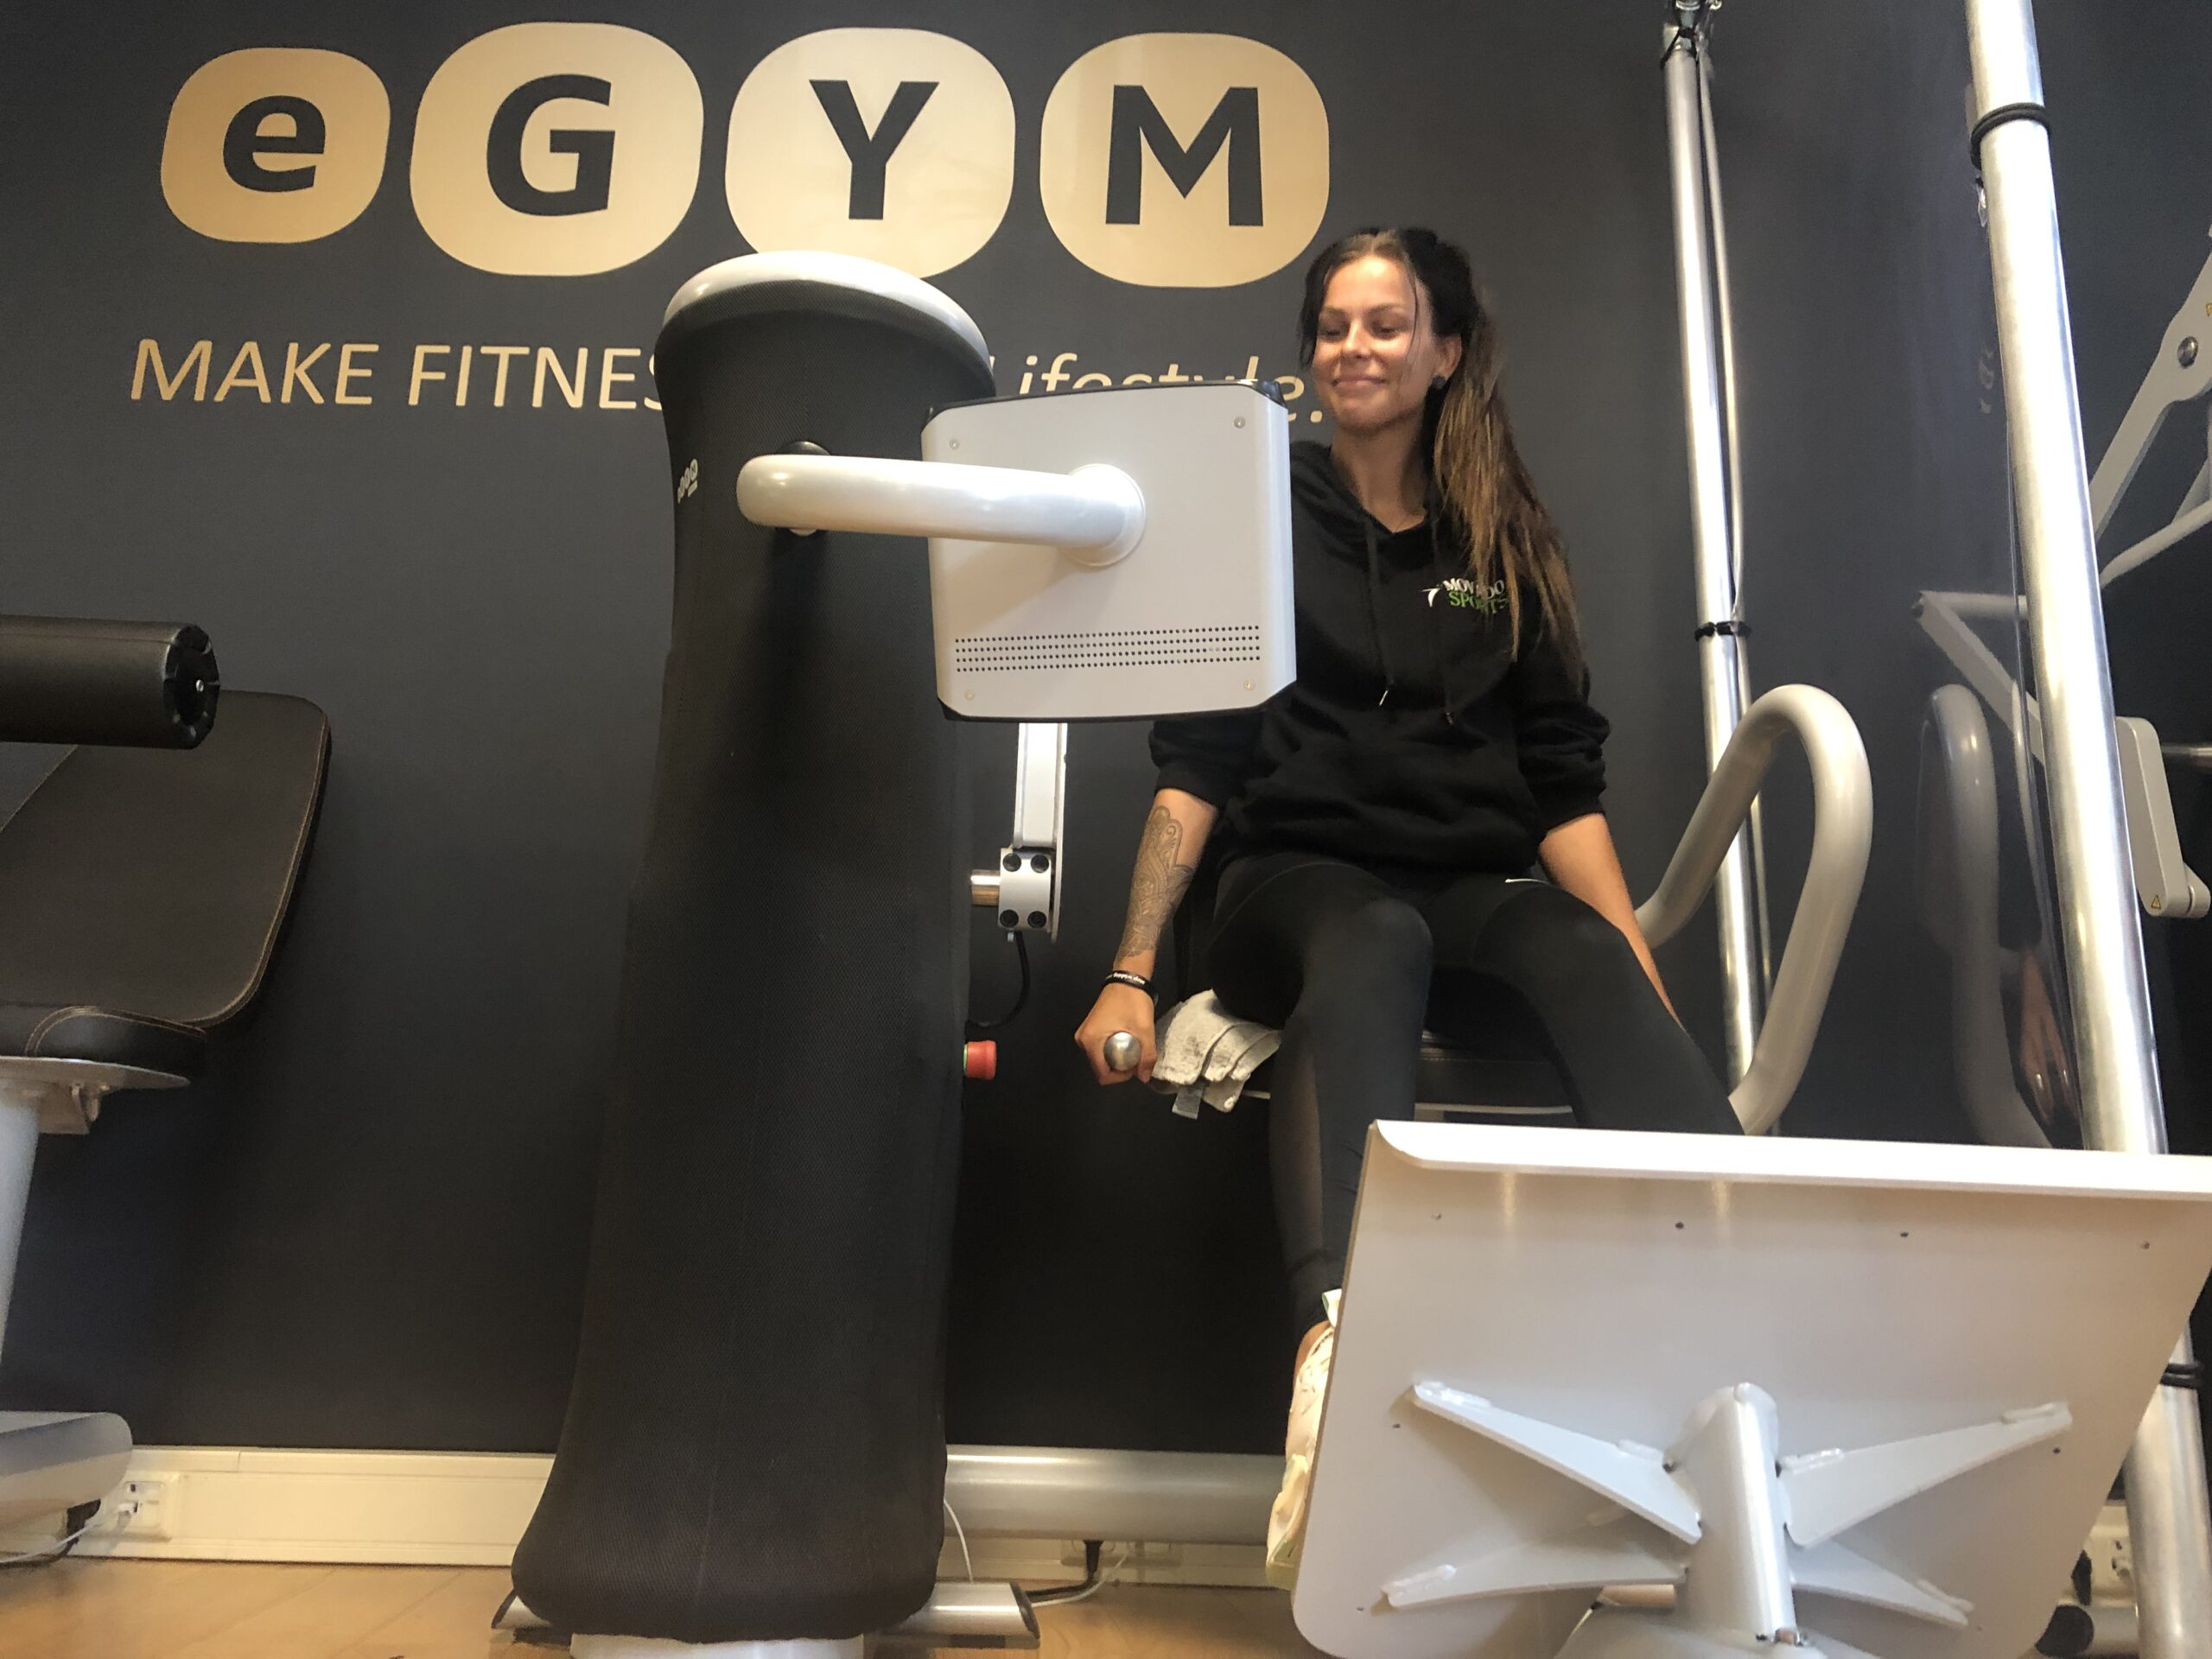 eGym: Fit in 30 minuten per training